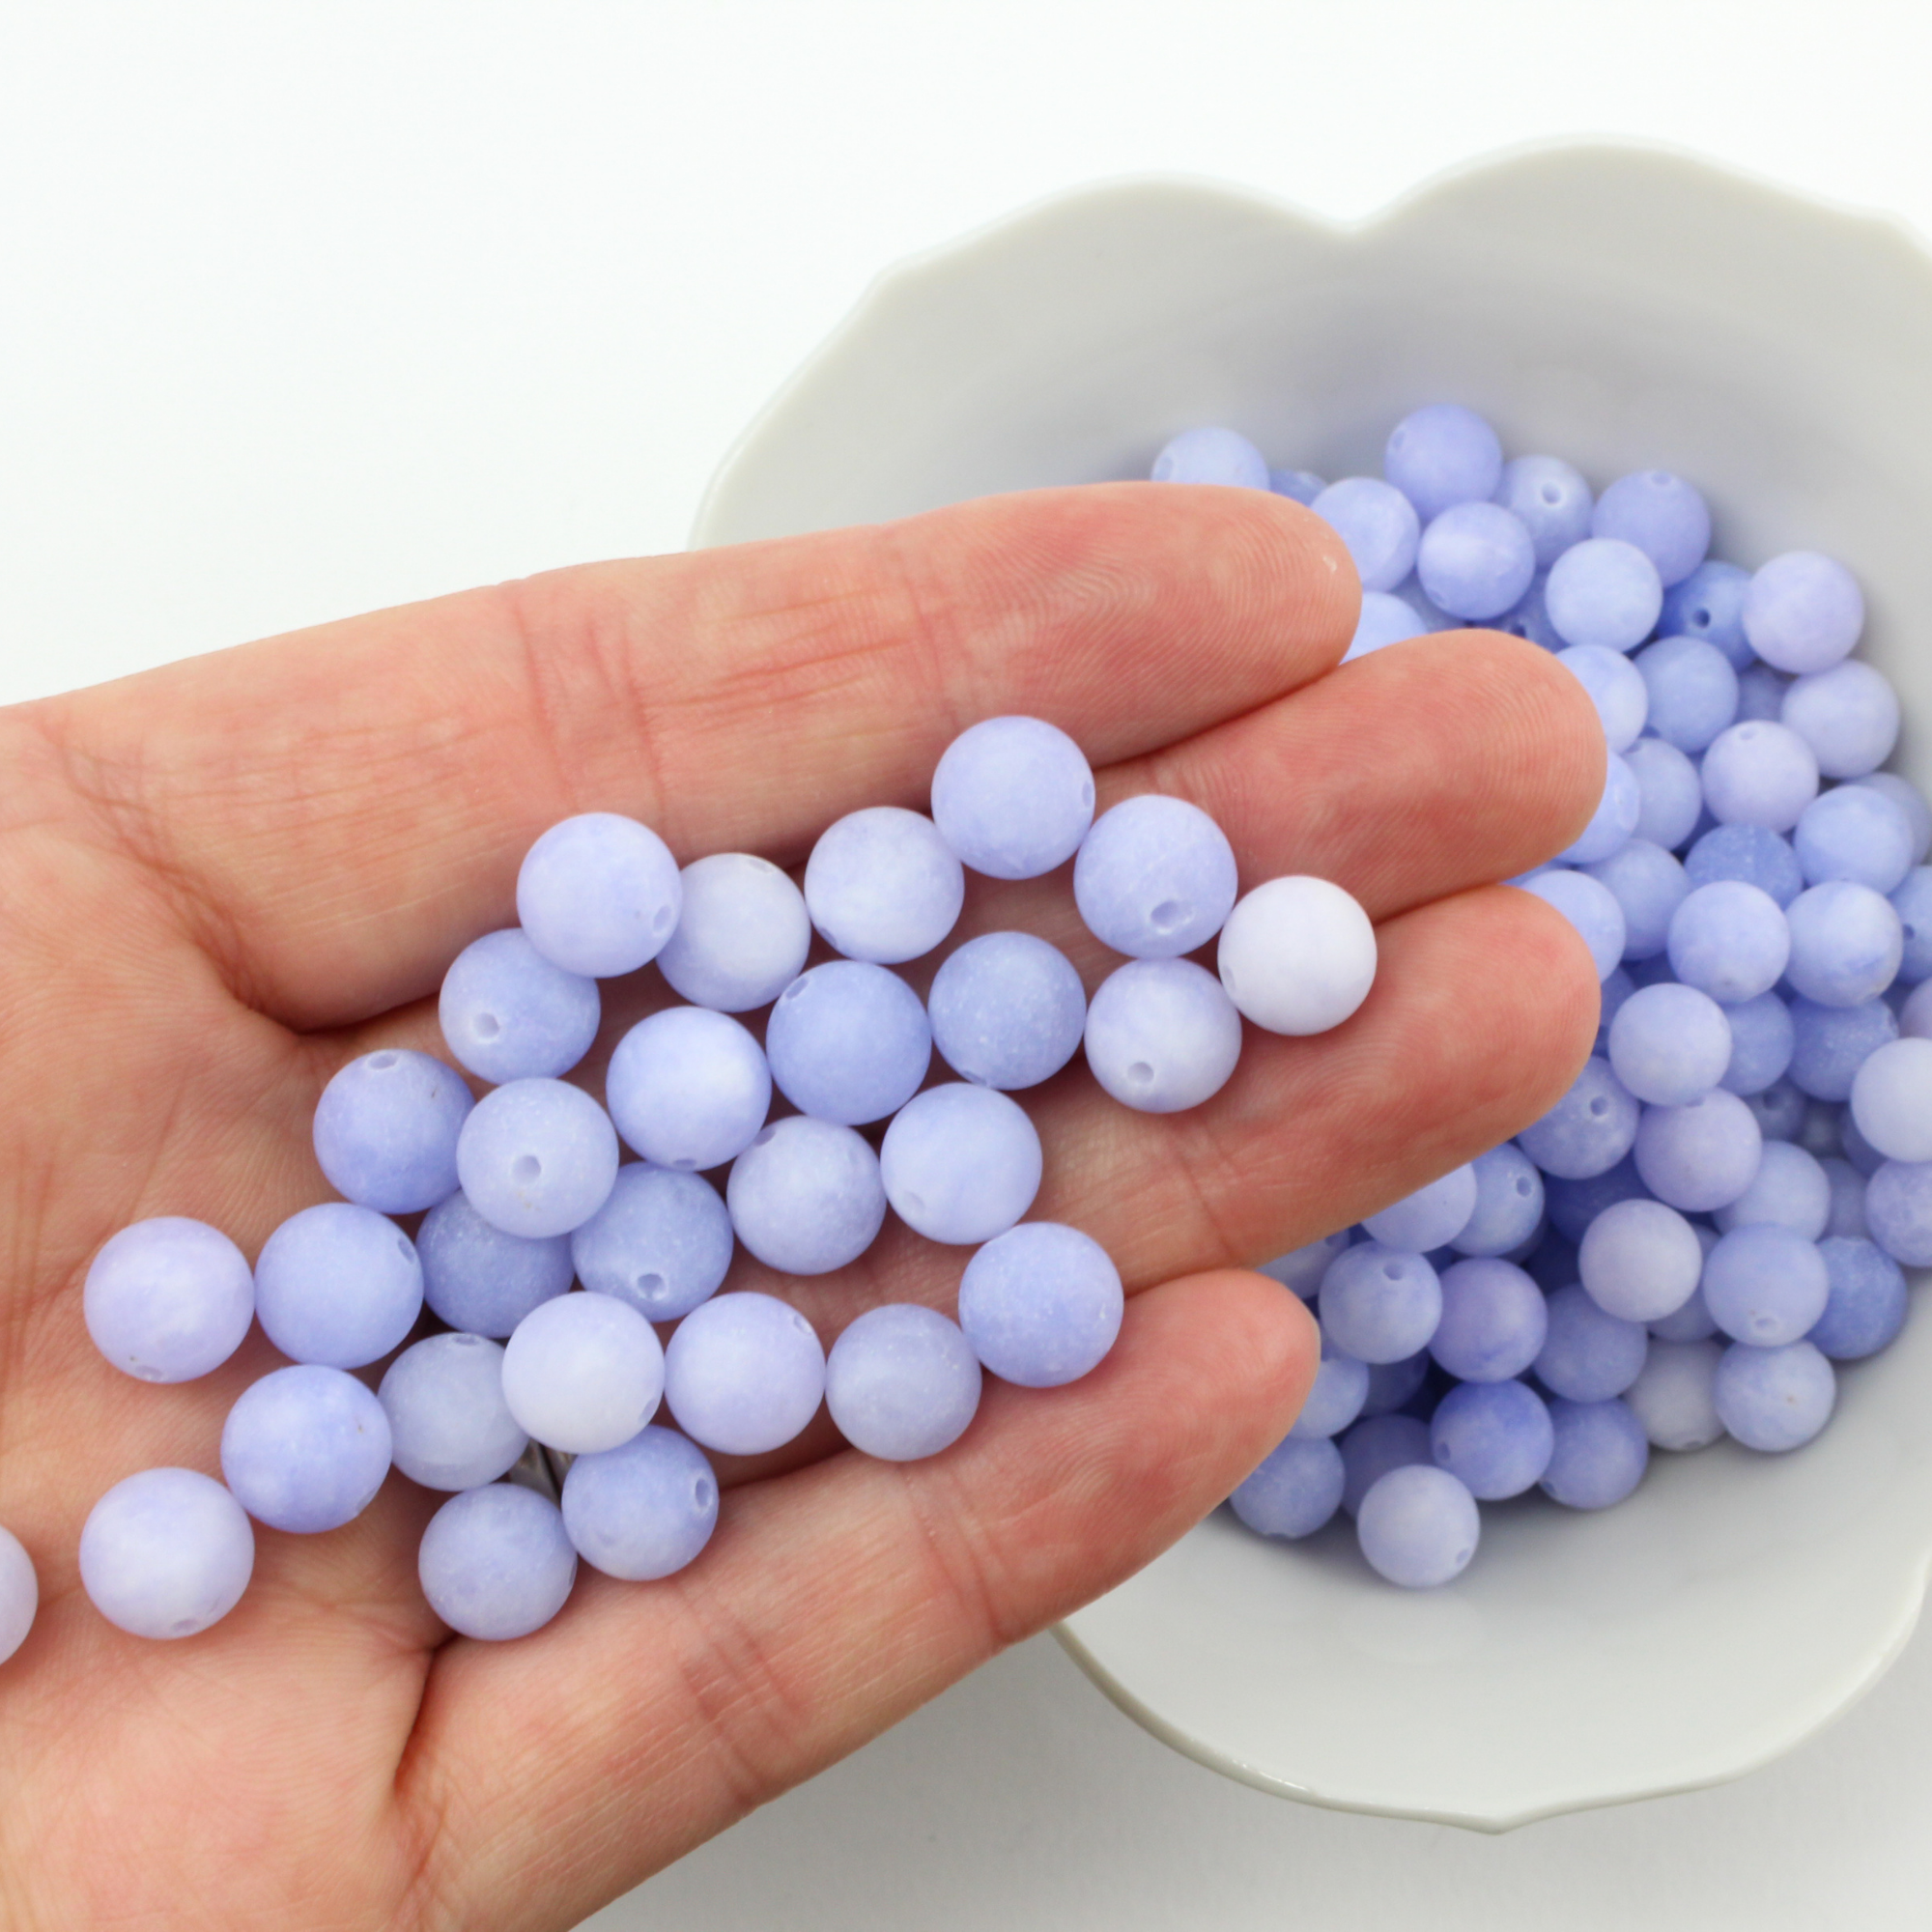 60 loose beads, natural white jade that are dyed/frosted a cornflower blue color. They are 8mm round with a 1mm hole size.